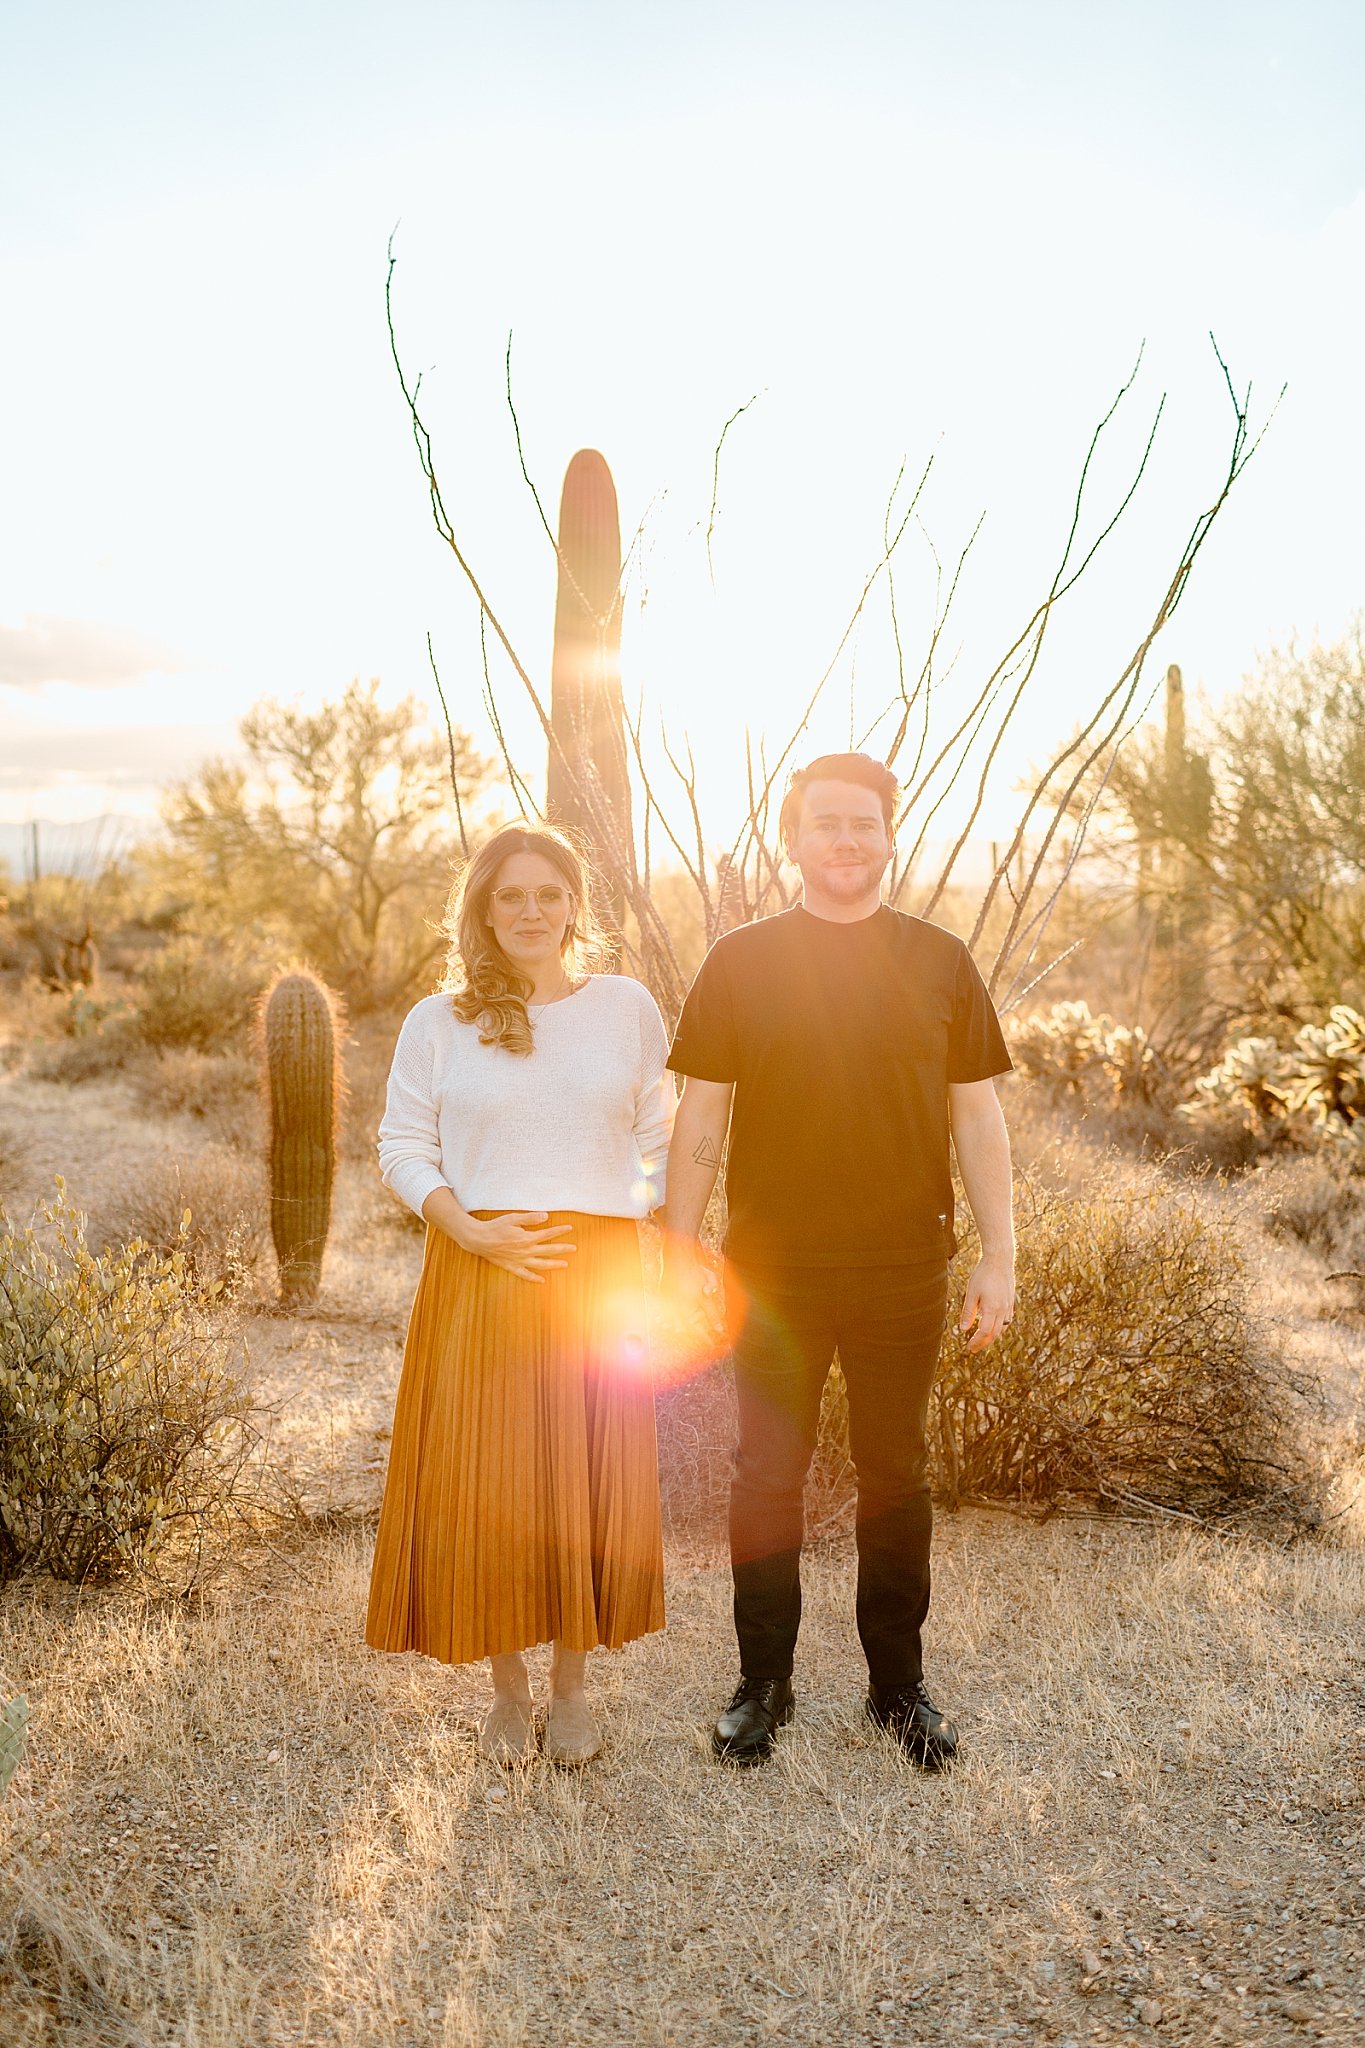  man and woman hold hands in front of sunset in desert by Lucy B Photography 